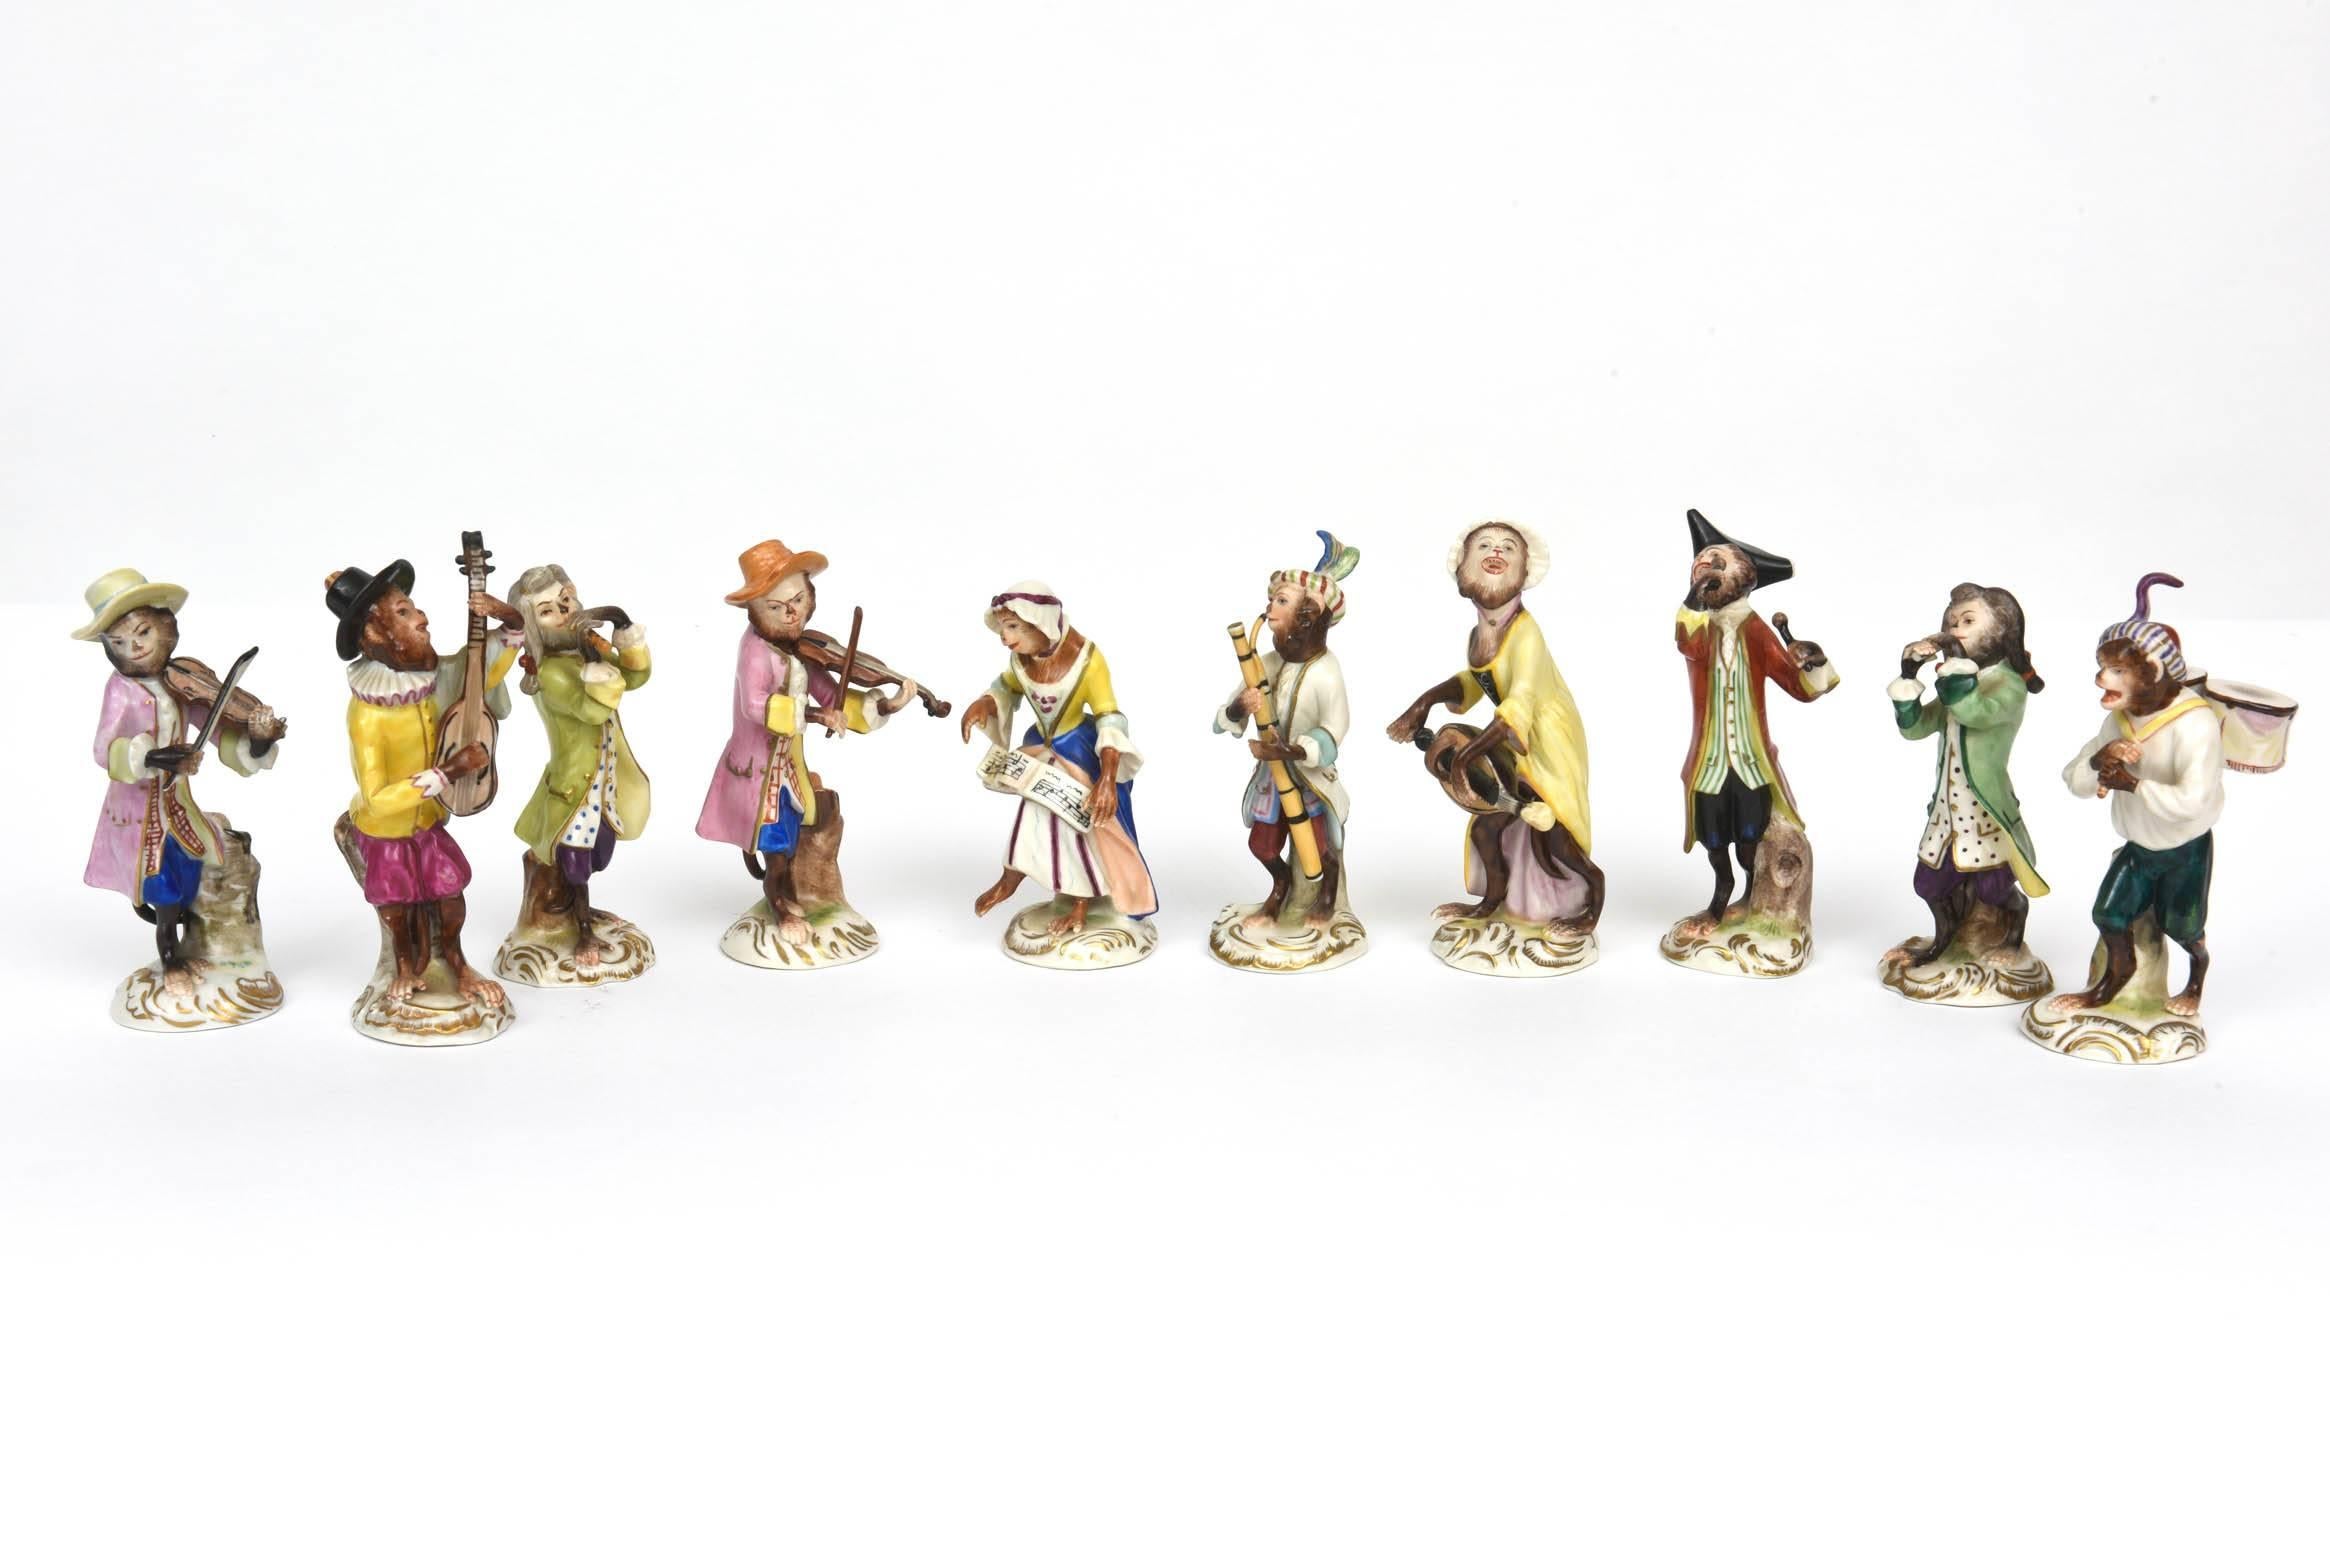 A charming set of whimsy featuring exquisitely molded fine Dresden Porcelain figurines from the designs inspired by the famous monkey orchestra produced for Meissen in the 18th century by Johann Joachim Kändler (German, 1706-1775). Kändler was one